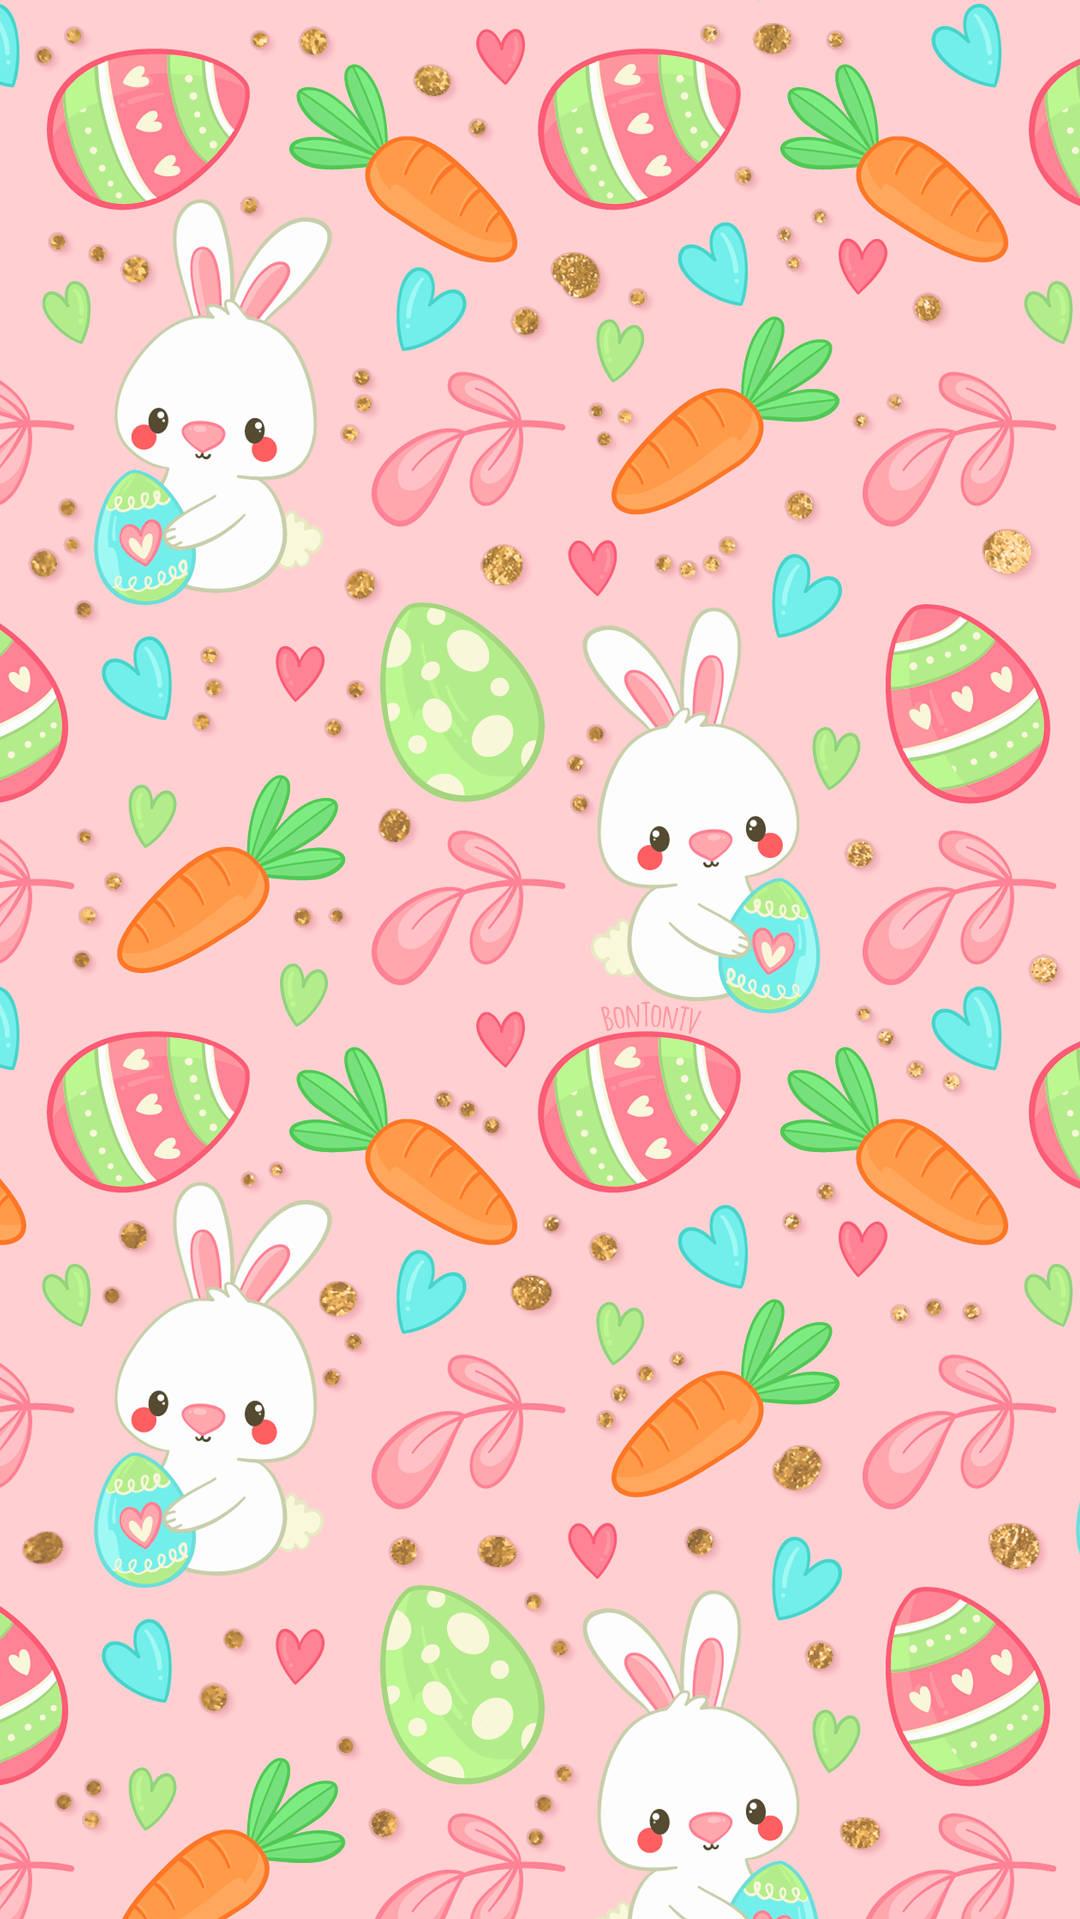 Free Easter Iphone Wallpaper Downloads [100] Easter Iphone